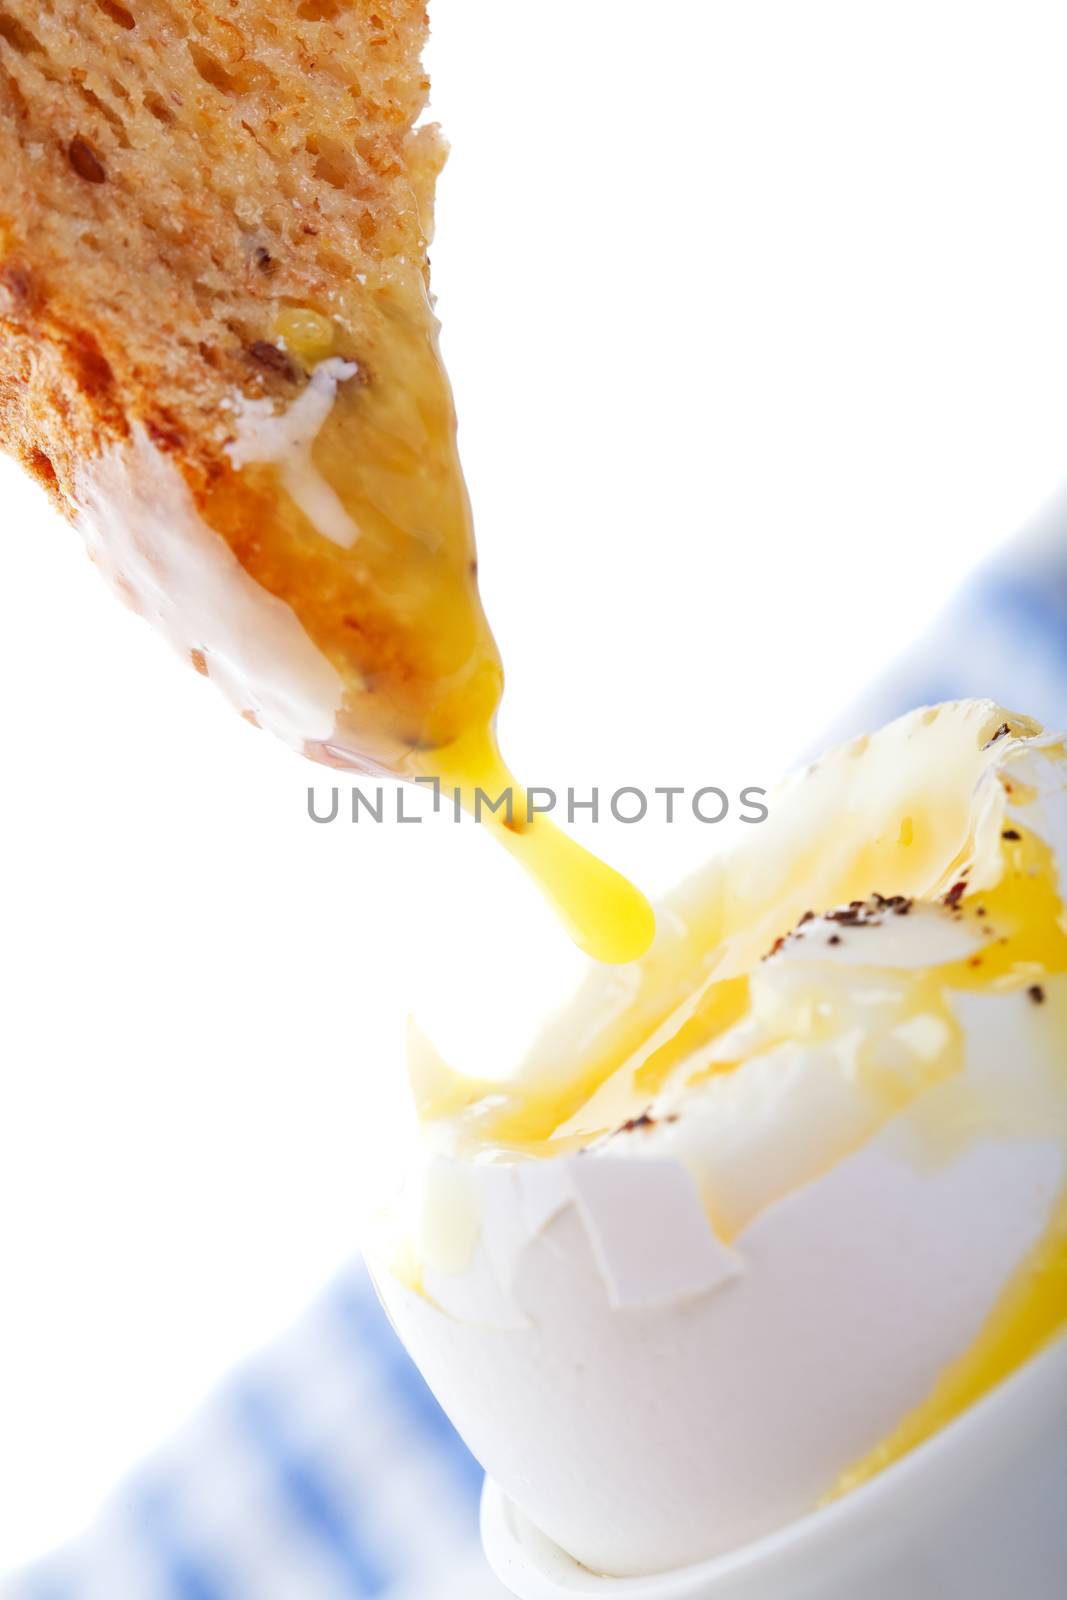 Soft-Boiled egg with toast dripping in yolk.  A popular European breakfast.